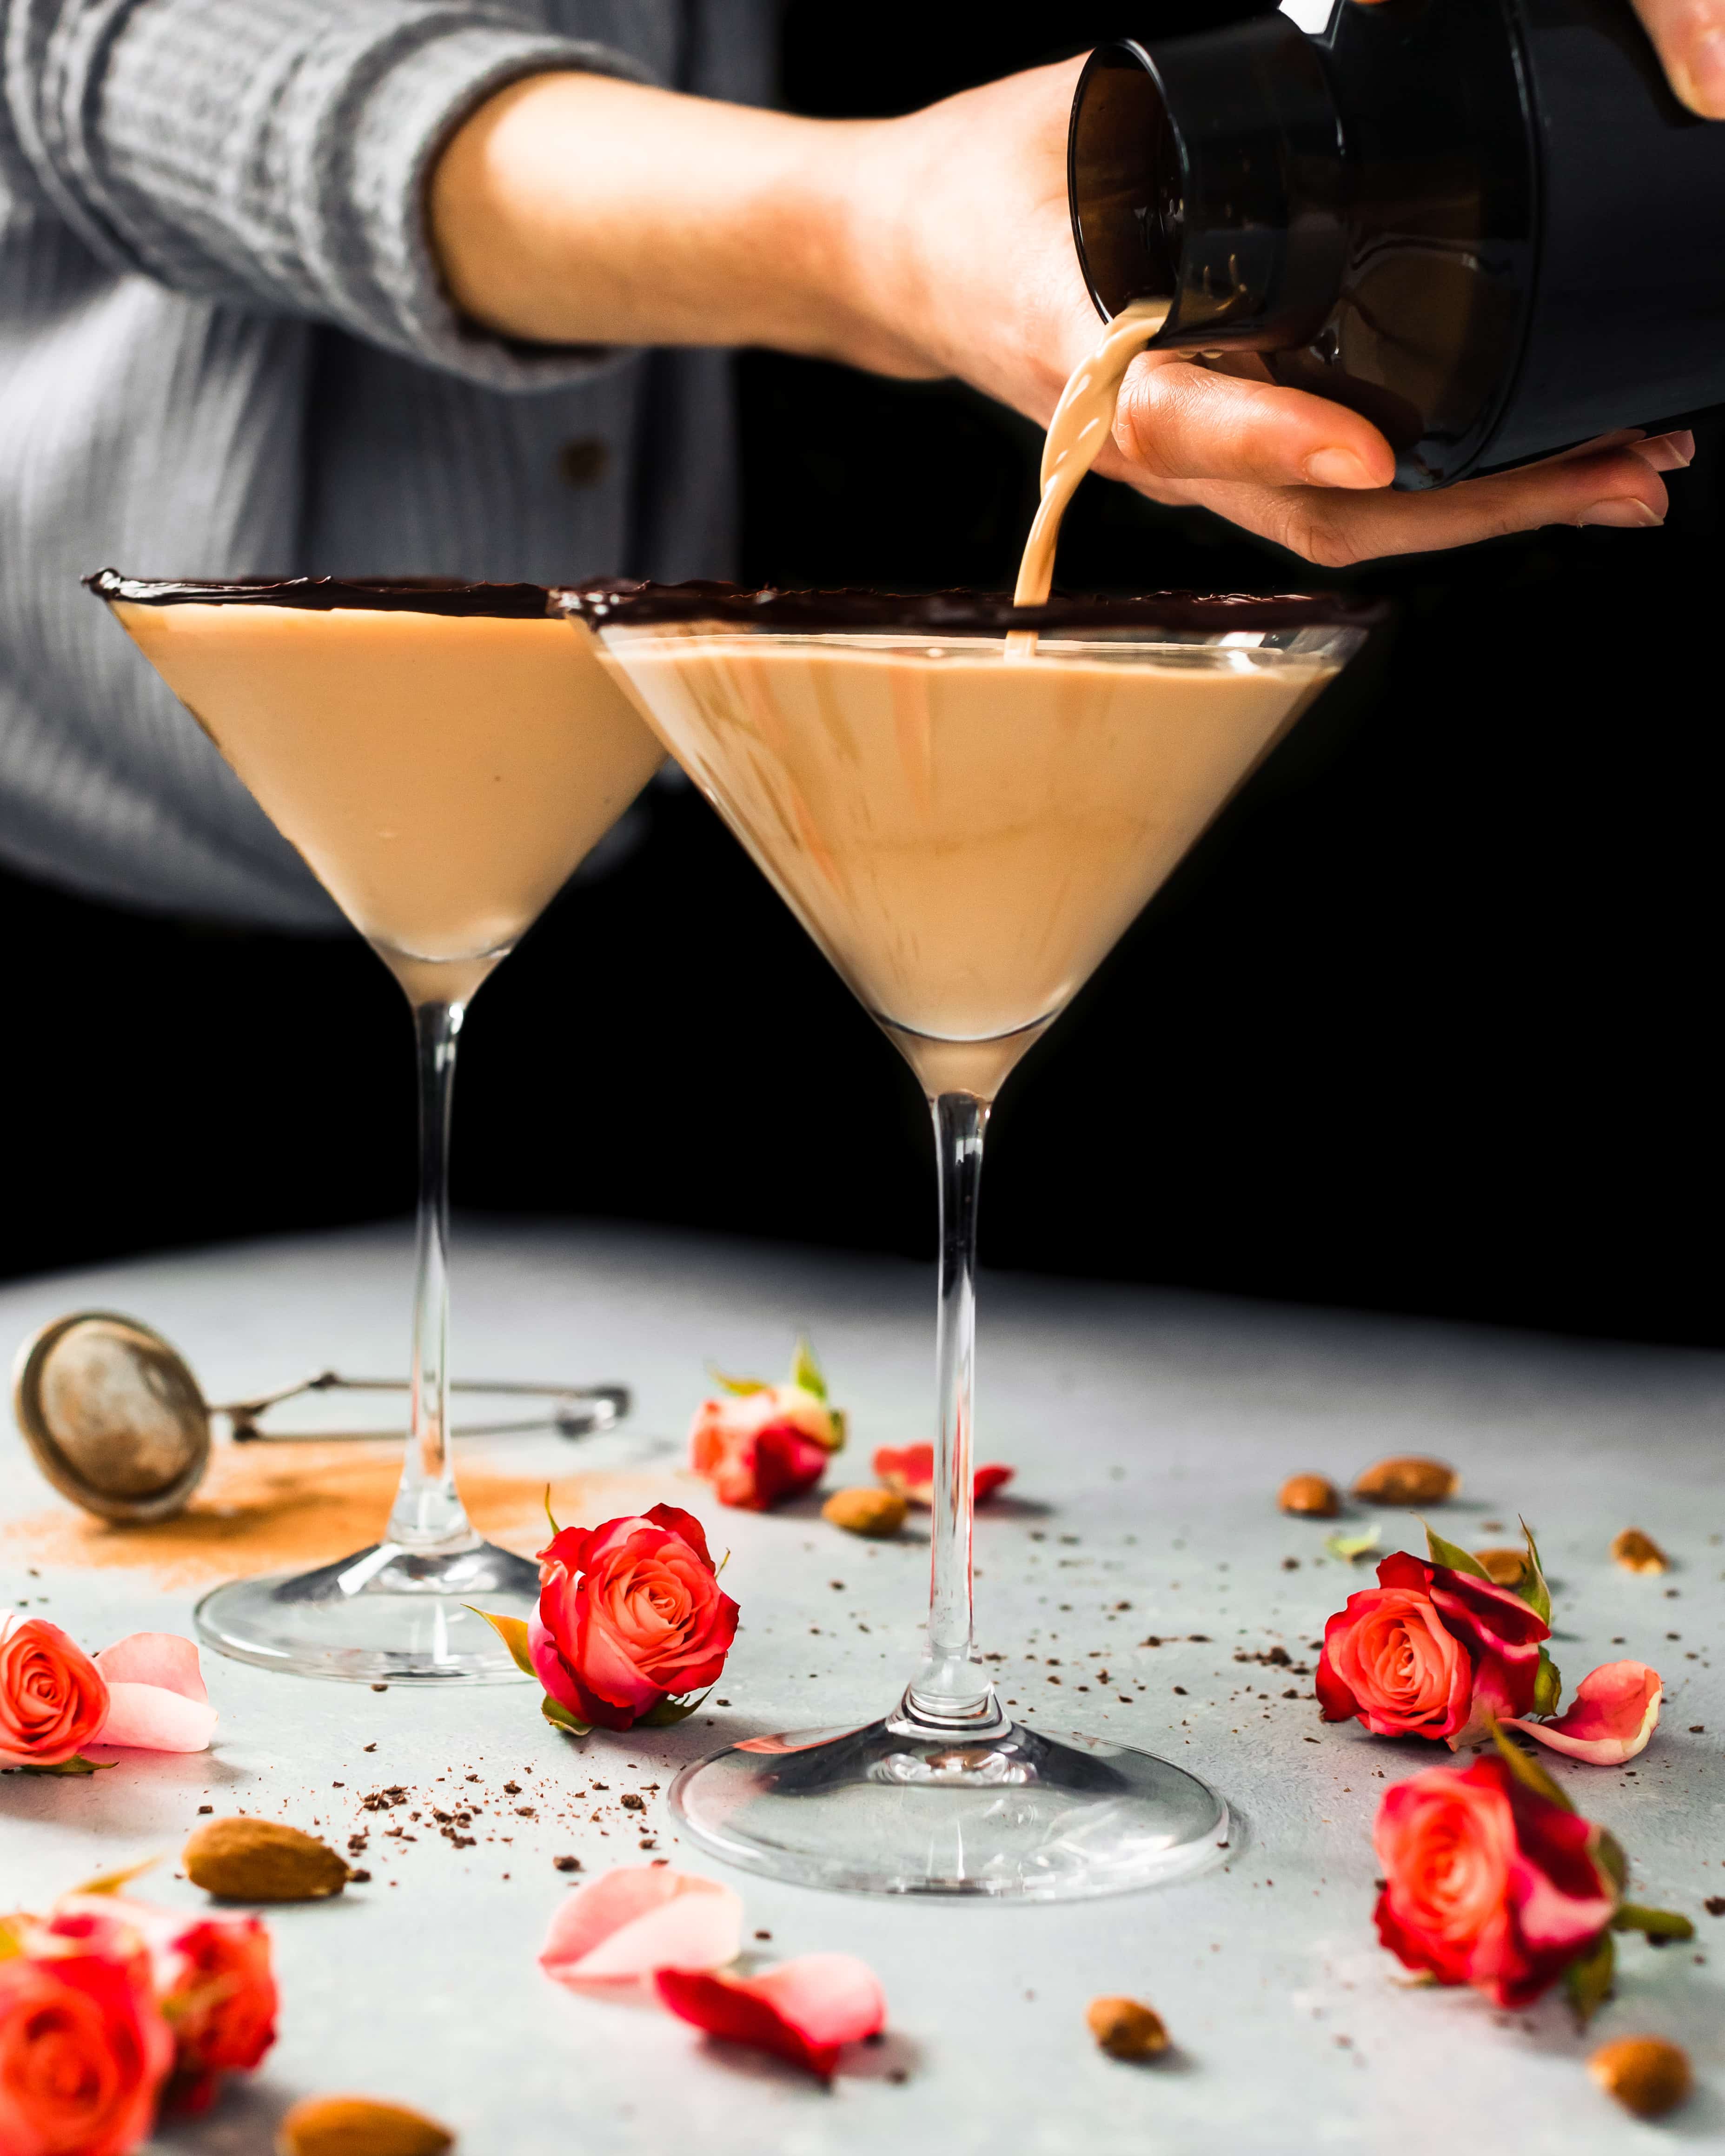 The best Chocolate Almond Martini for a special occasion